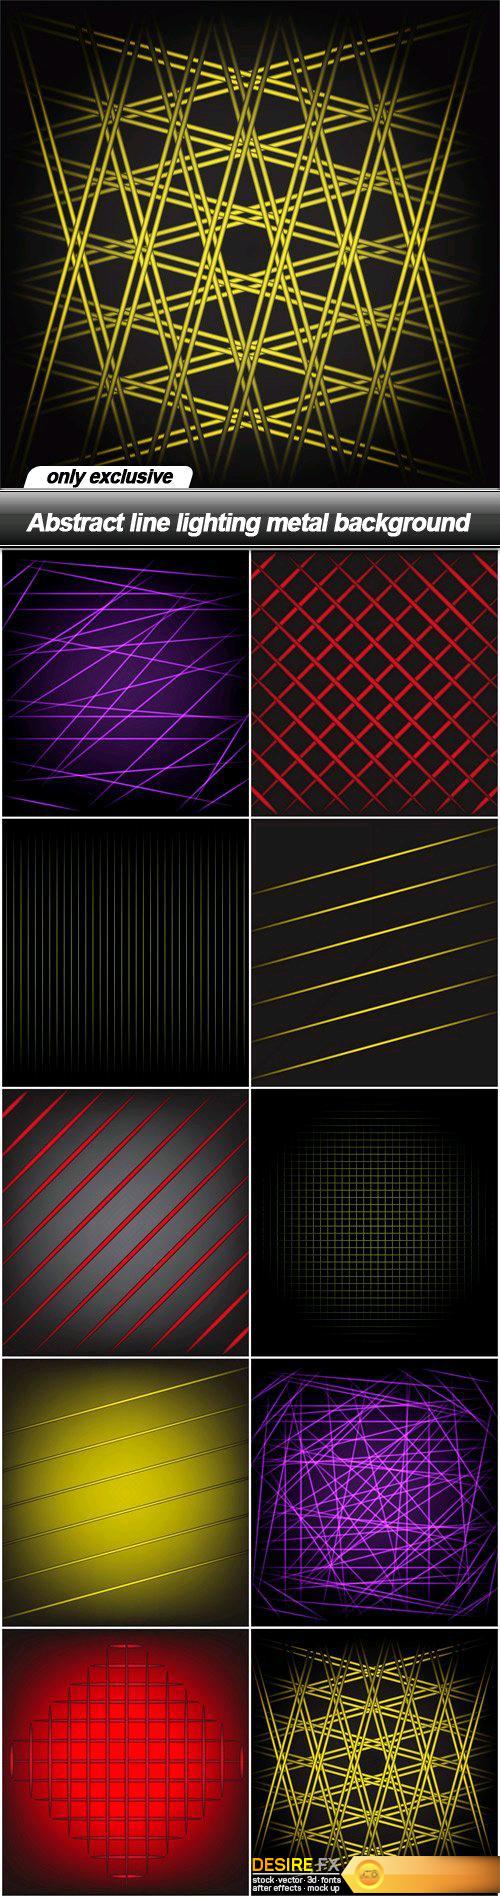 Abstract line lighting metal background - 10 EPS